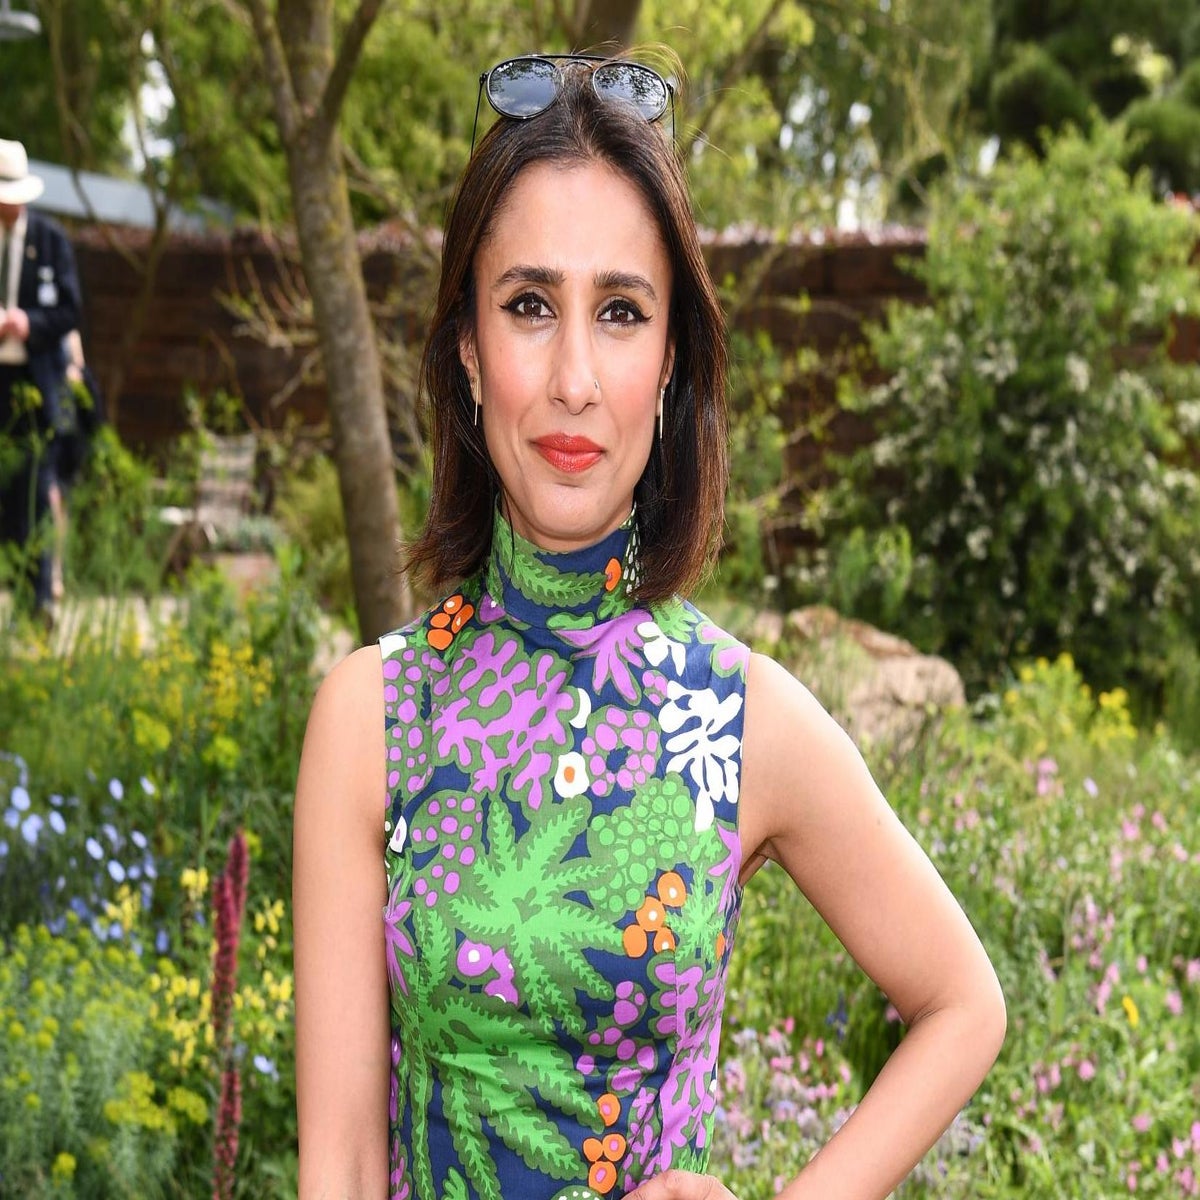 Hannaha Martin Porn - Anita Rani opens up about having a miscarriage: 'I bottled up my feelings'  | The Independent | The Independent